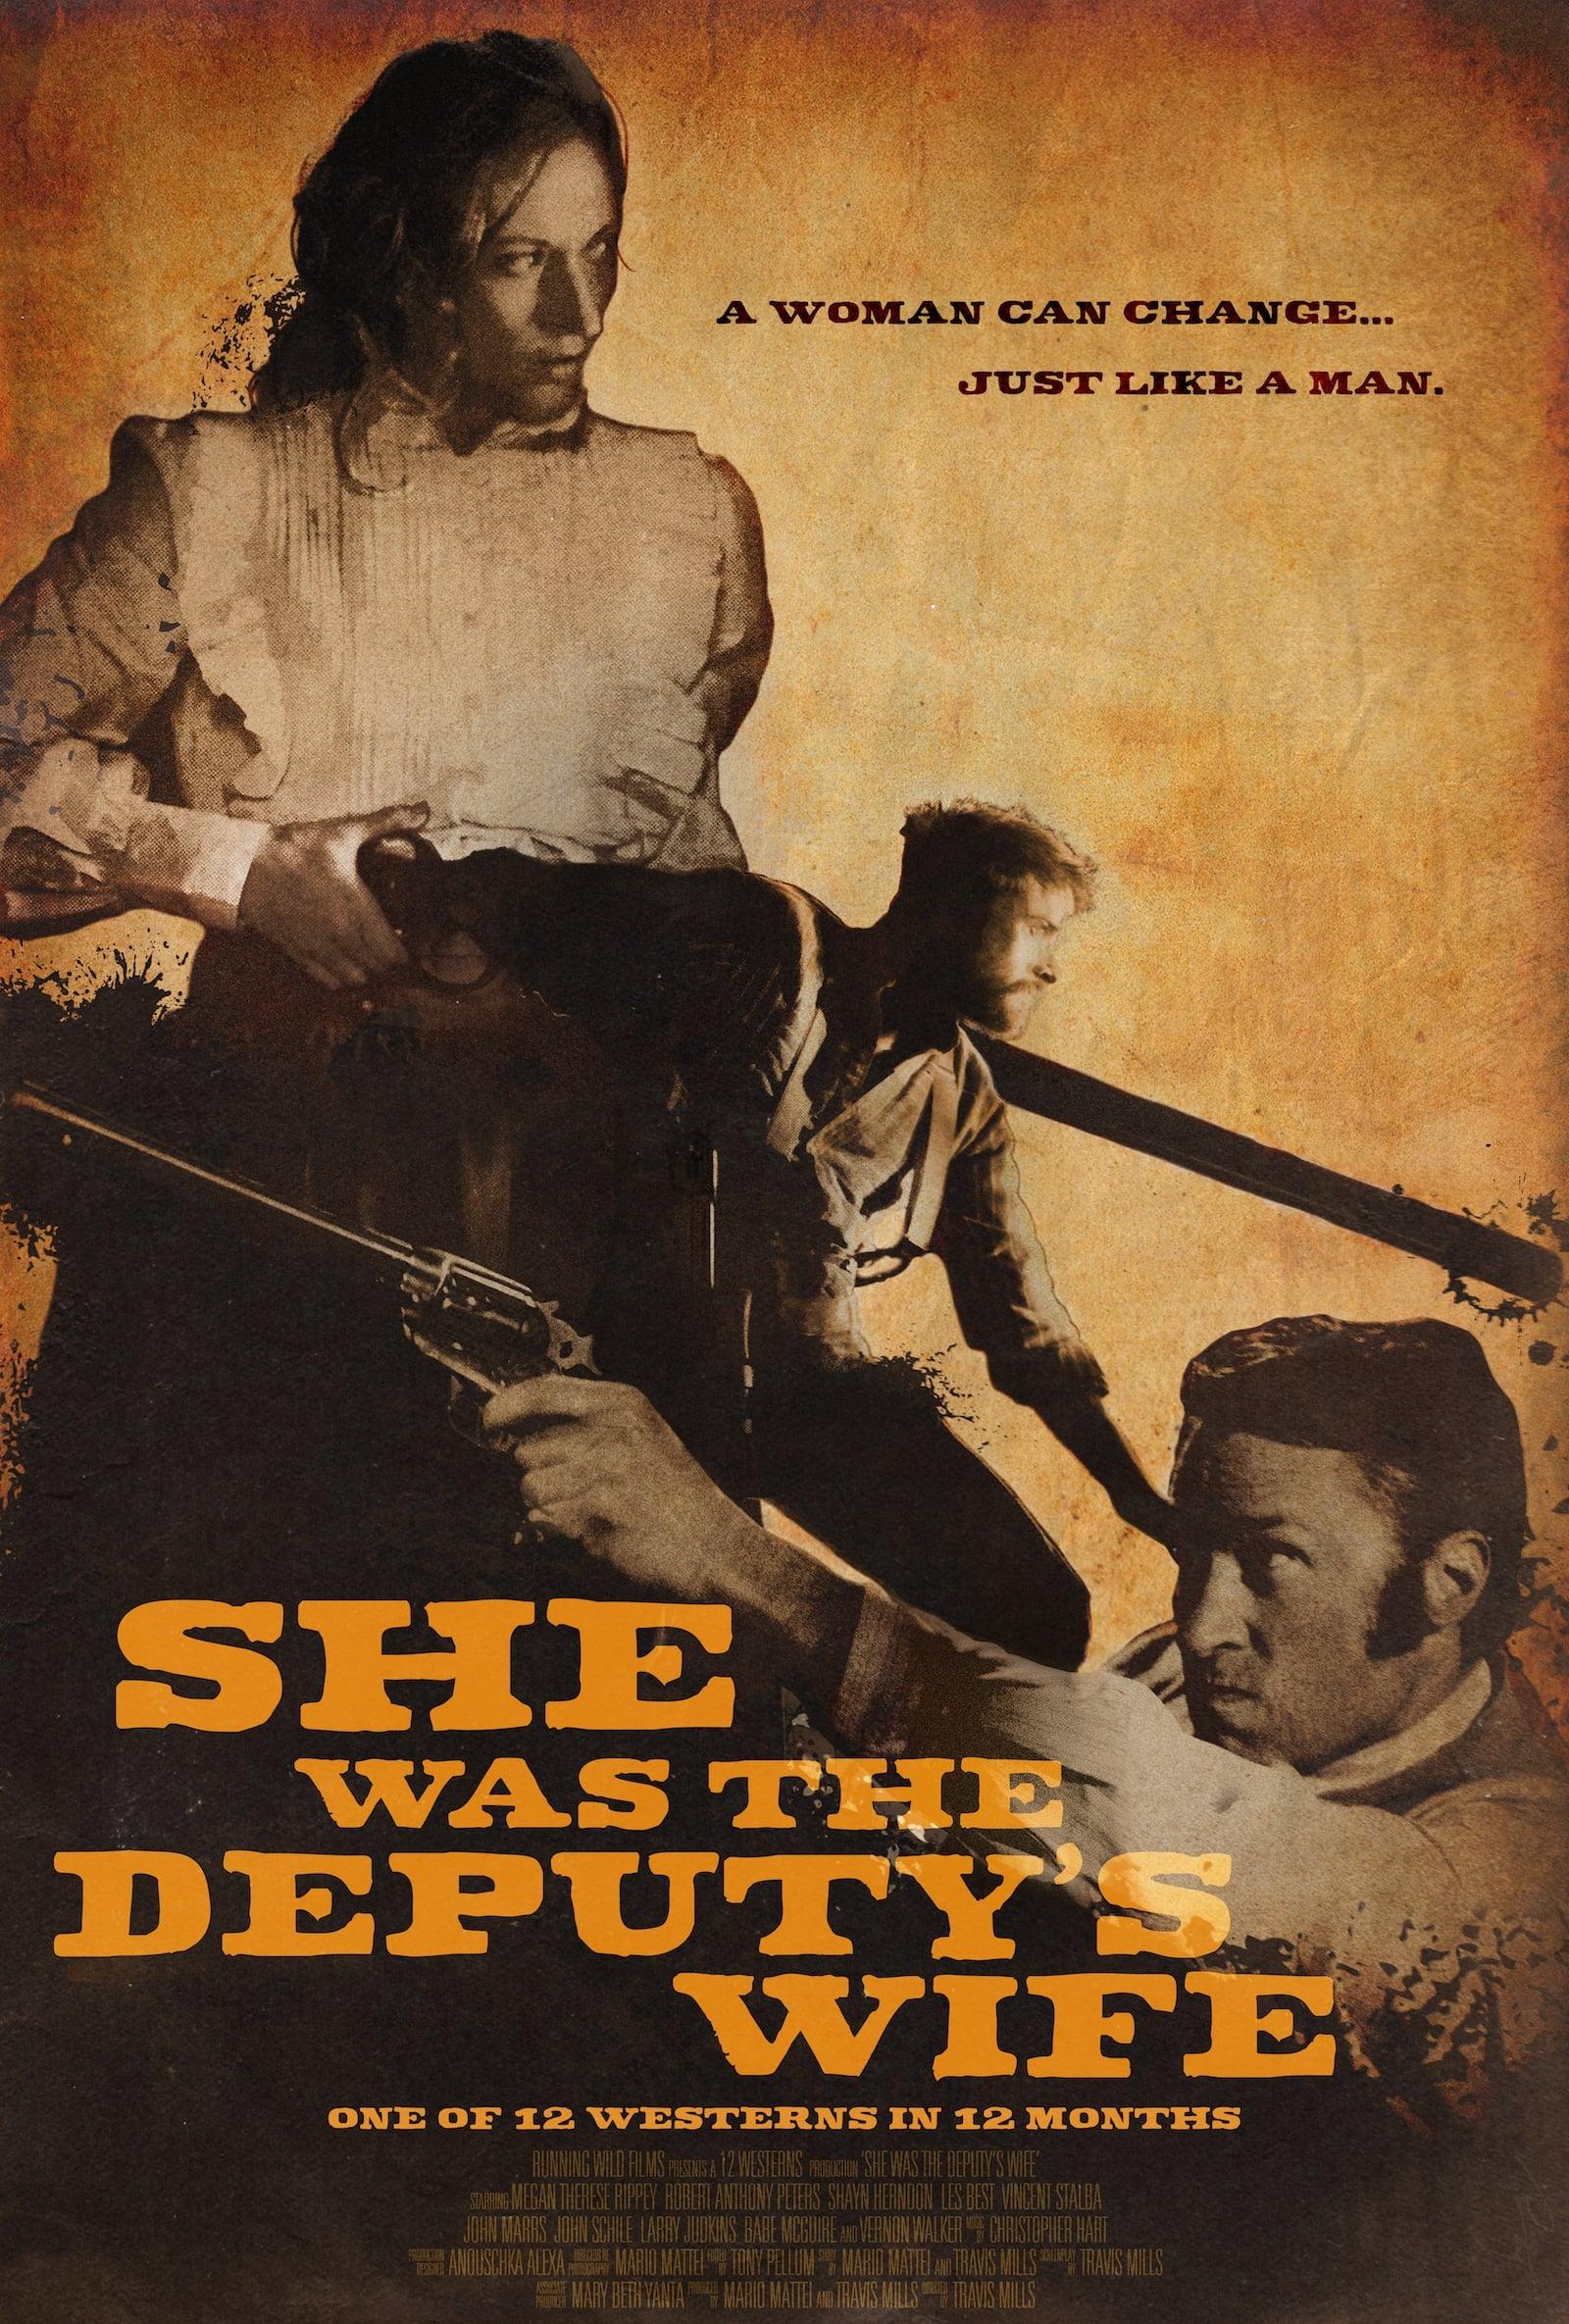 She was the Deputy's Wife poster